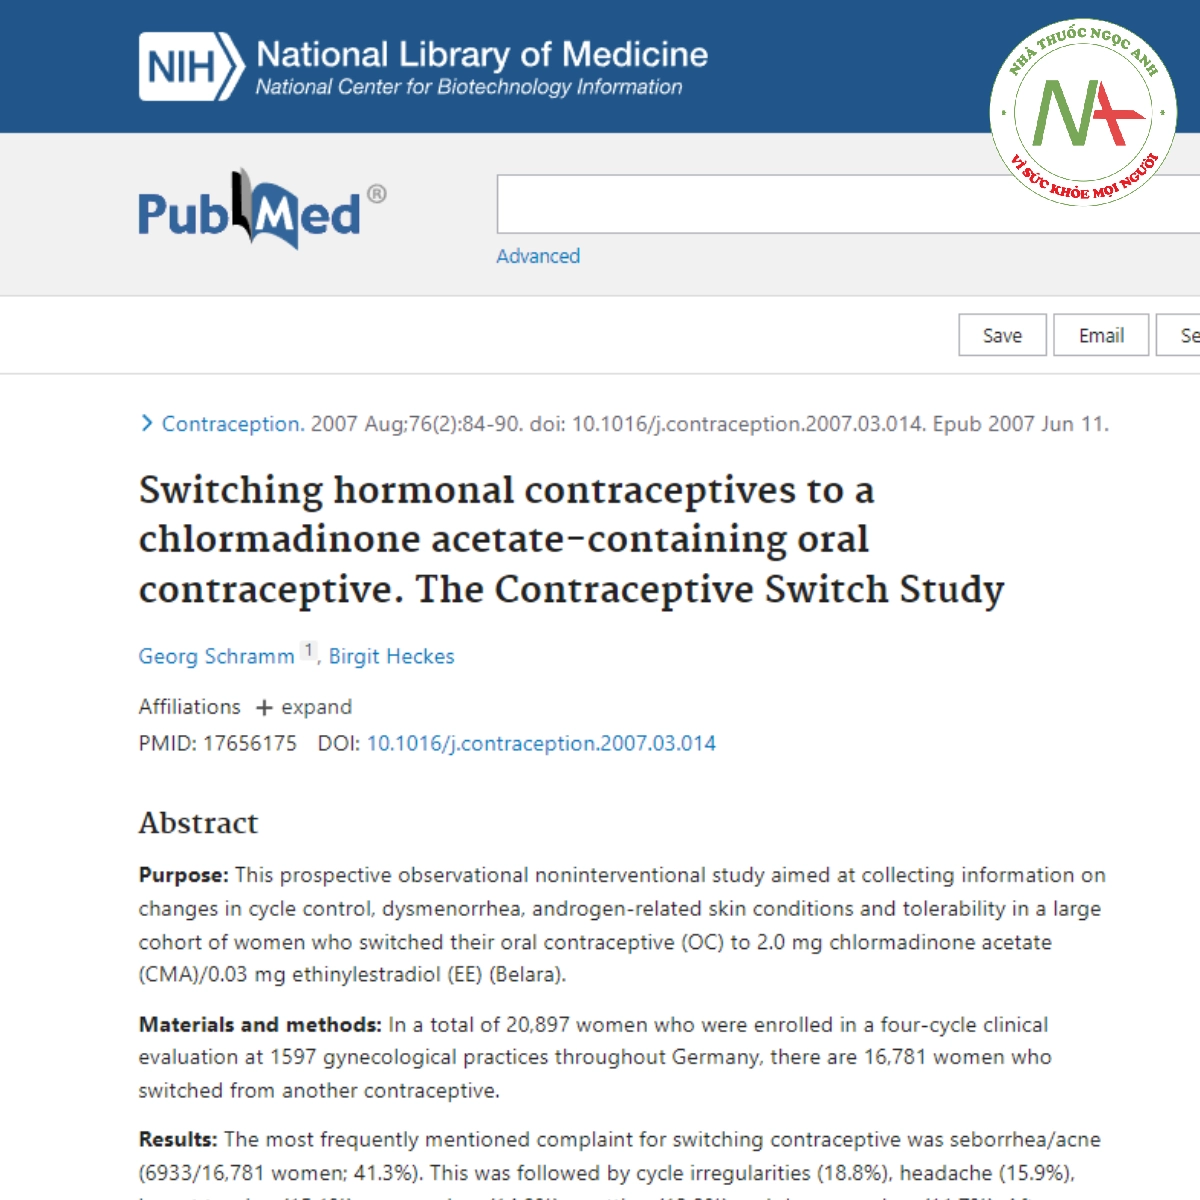 Switching hormonal contraceptives to a chlormadinone acetate-containing oral contraceptive. The Contraceptive Switch Study